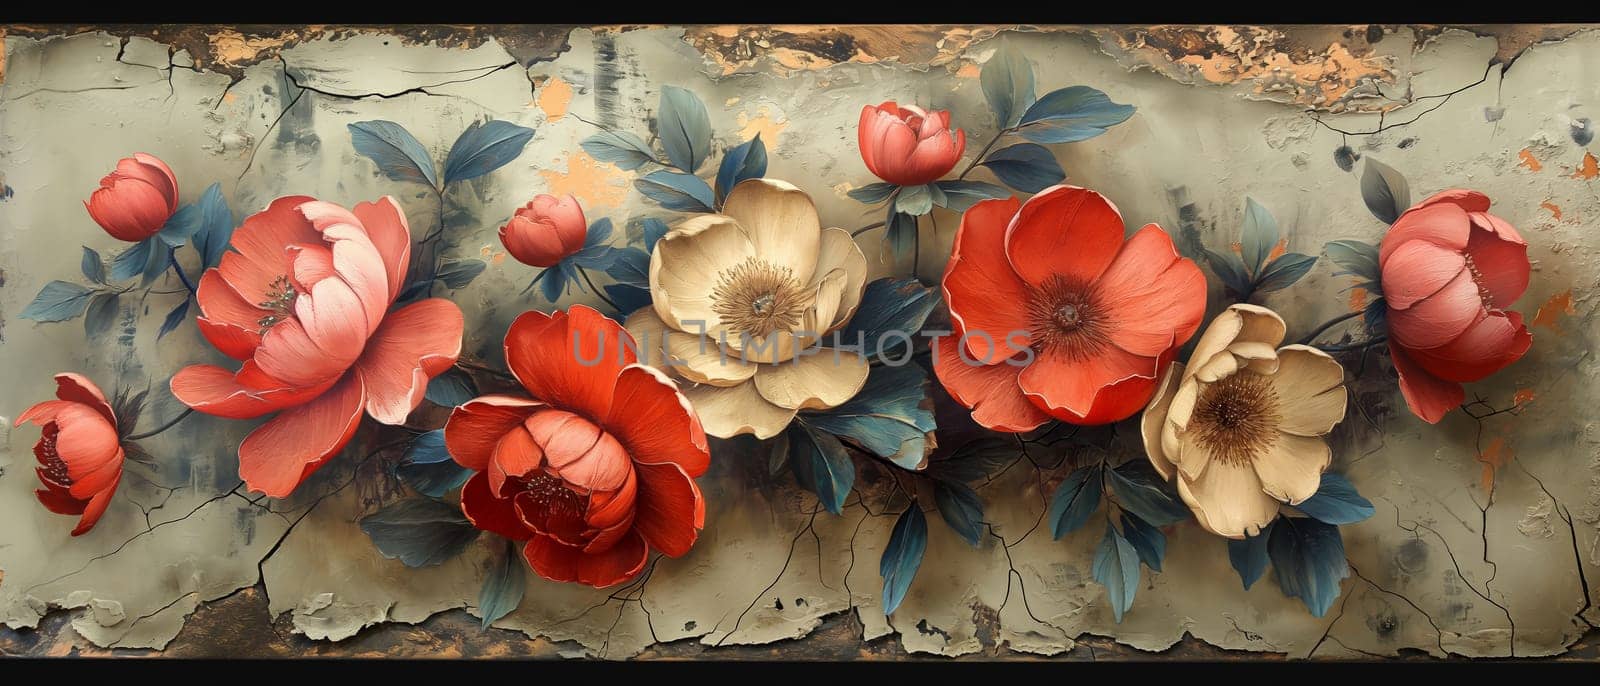 Vintage painting depicting large flowers with delicate leaves. by Fischeron